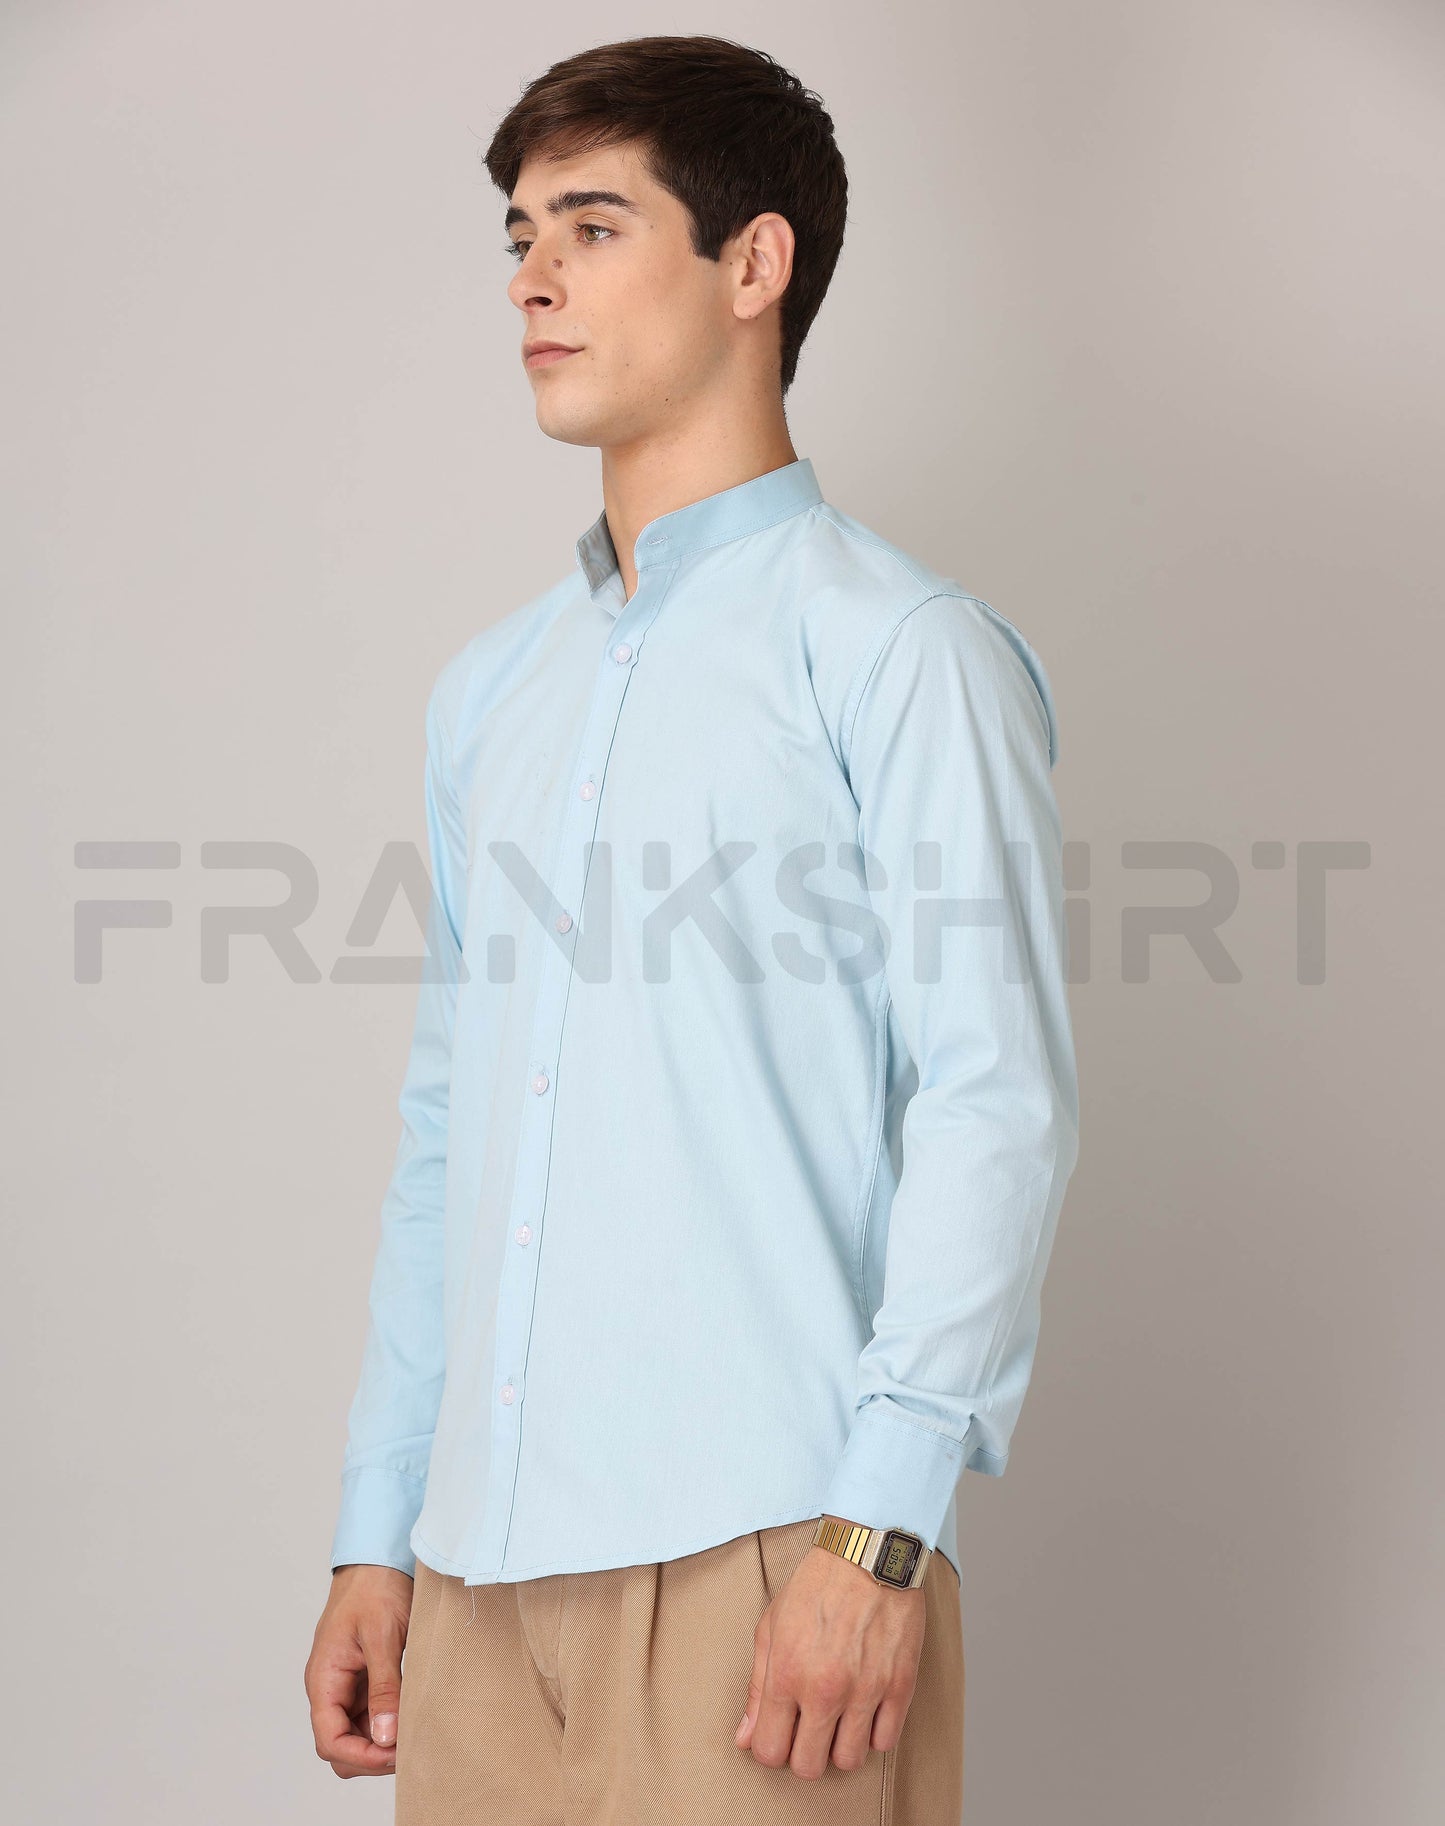 Frankshirt Chinese Collar Light Blue Tailored Fit Cotton Casual Shirt for Man